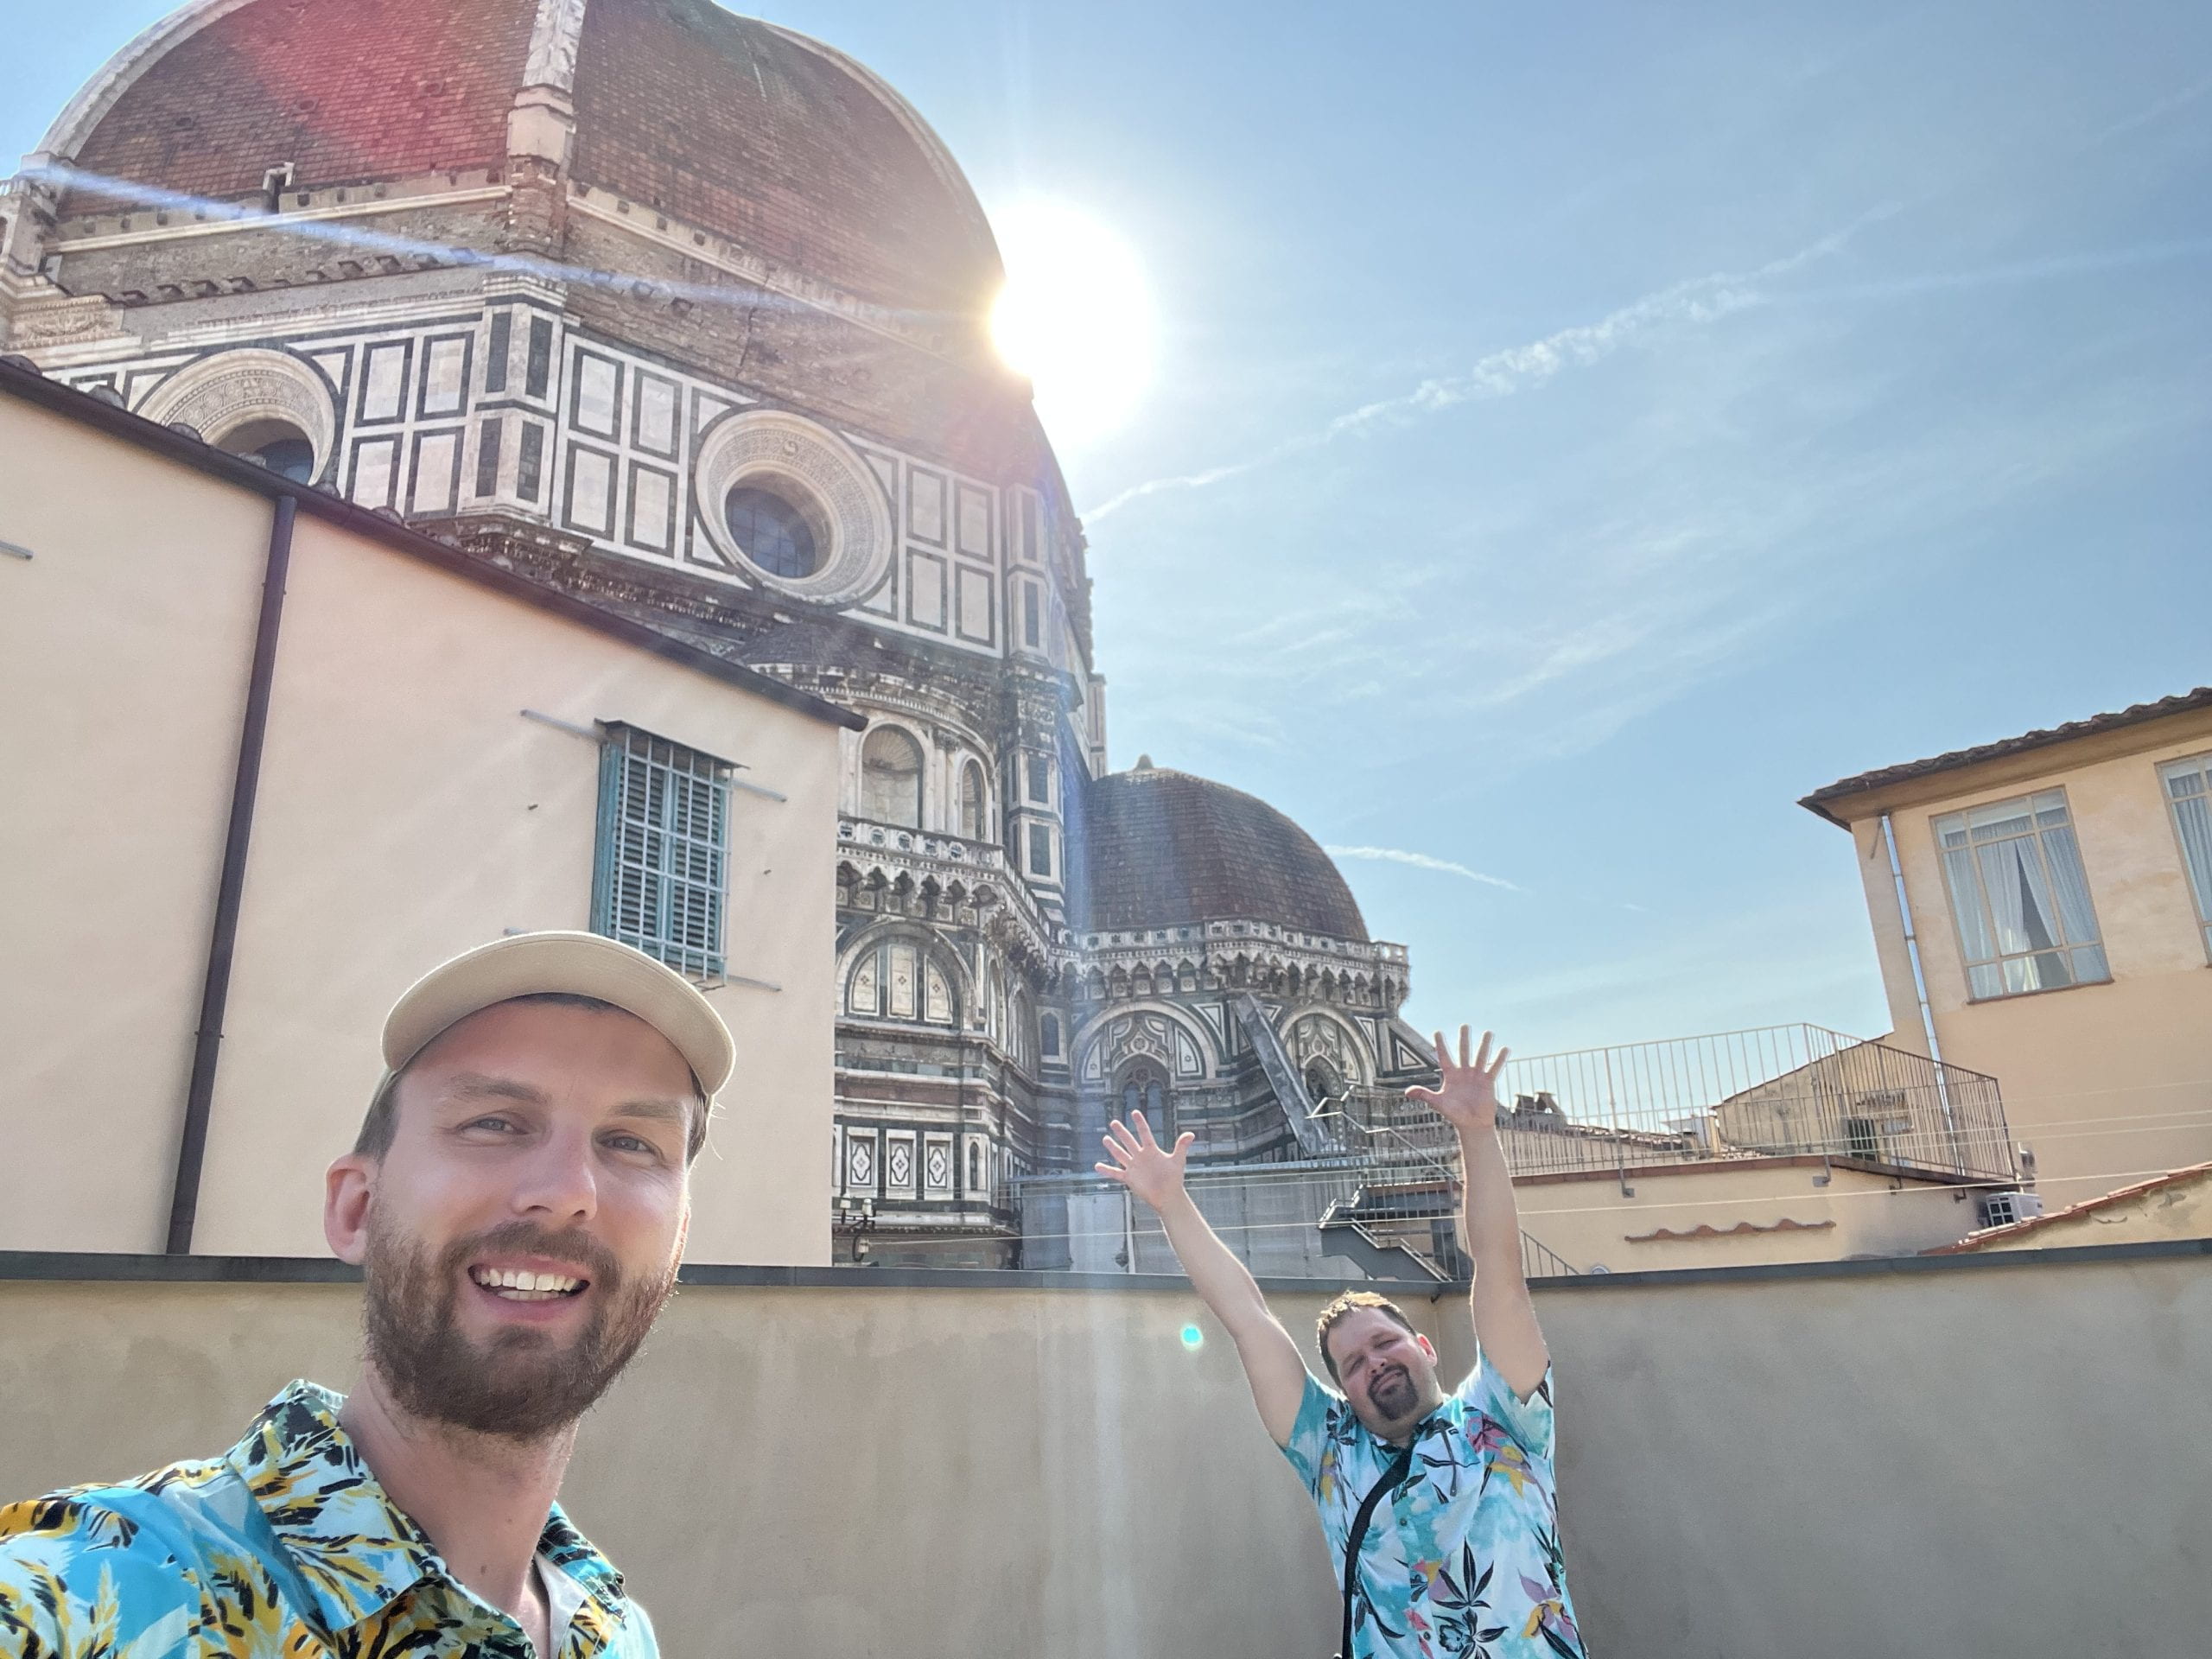 Two men in blue Hawaiin print shirt in front of an elaborate, domed church roof.